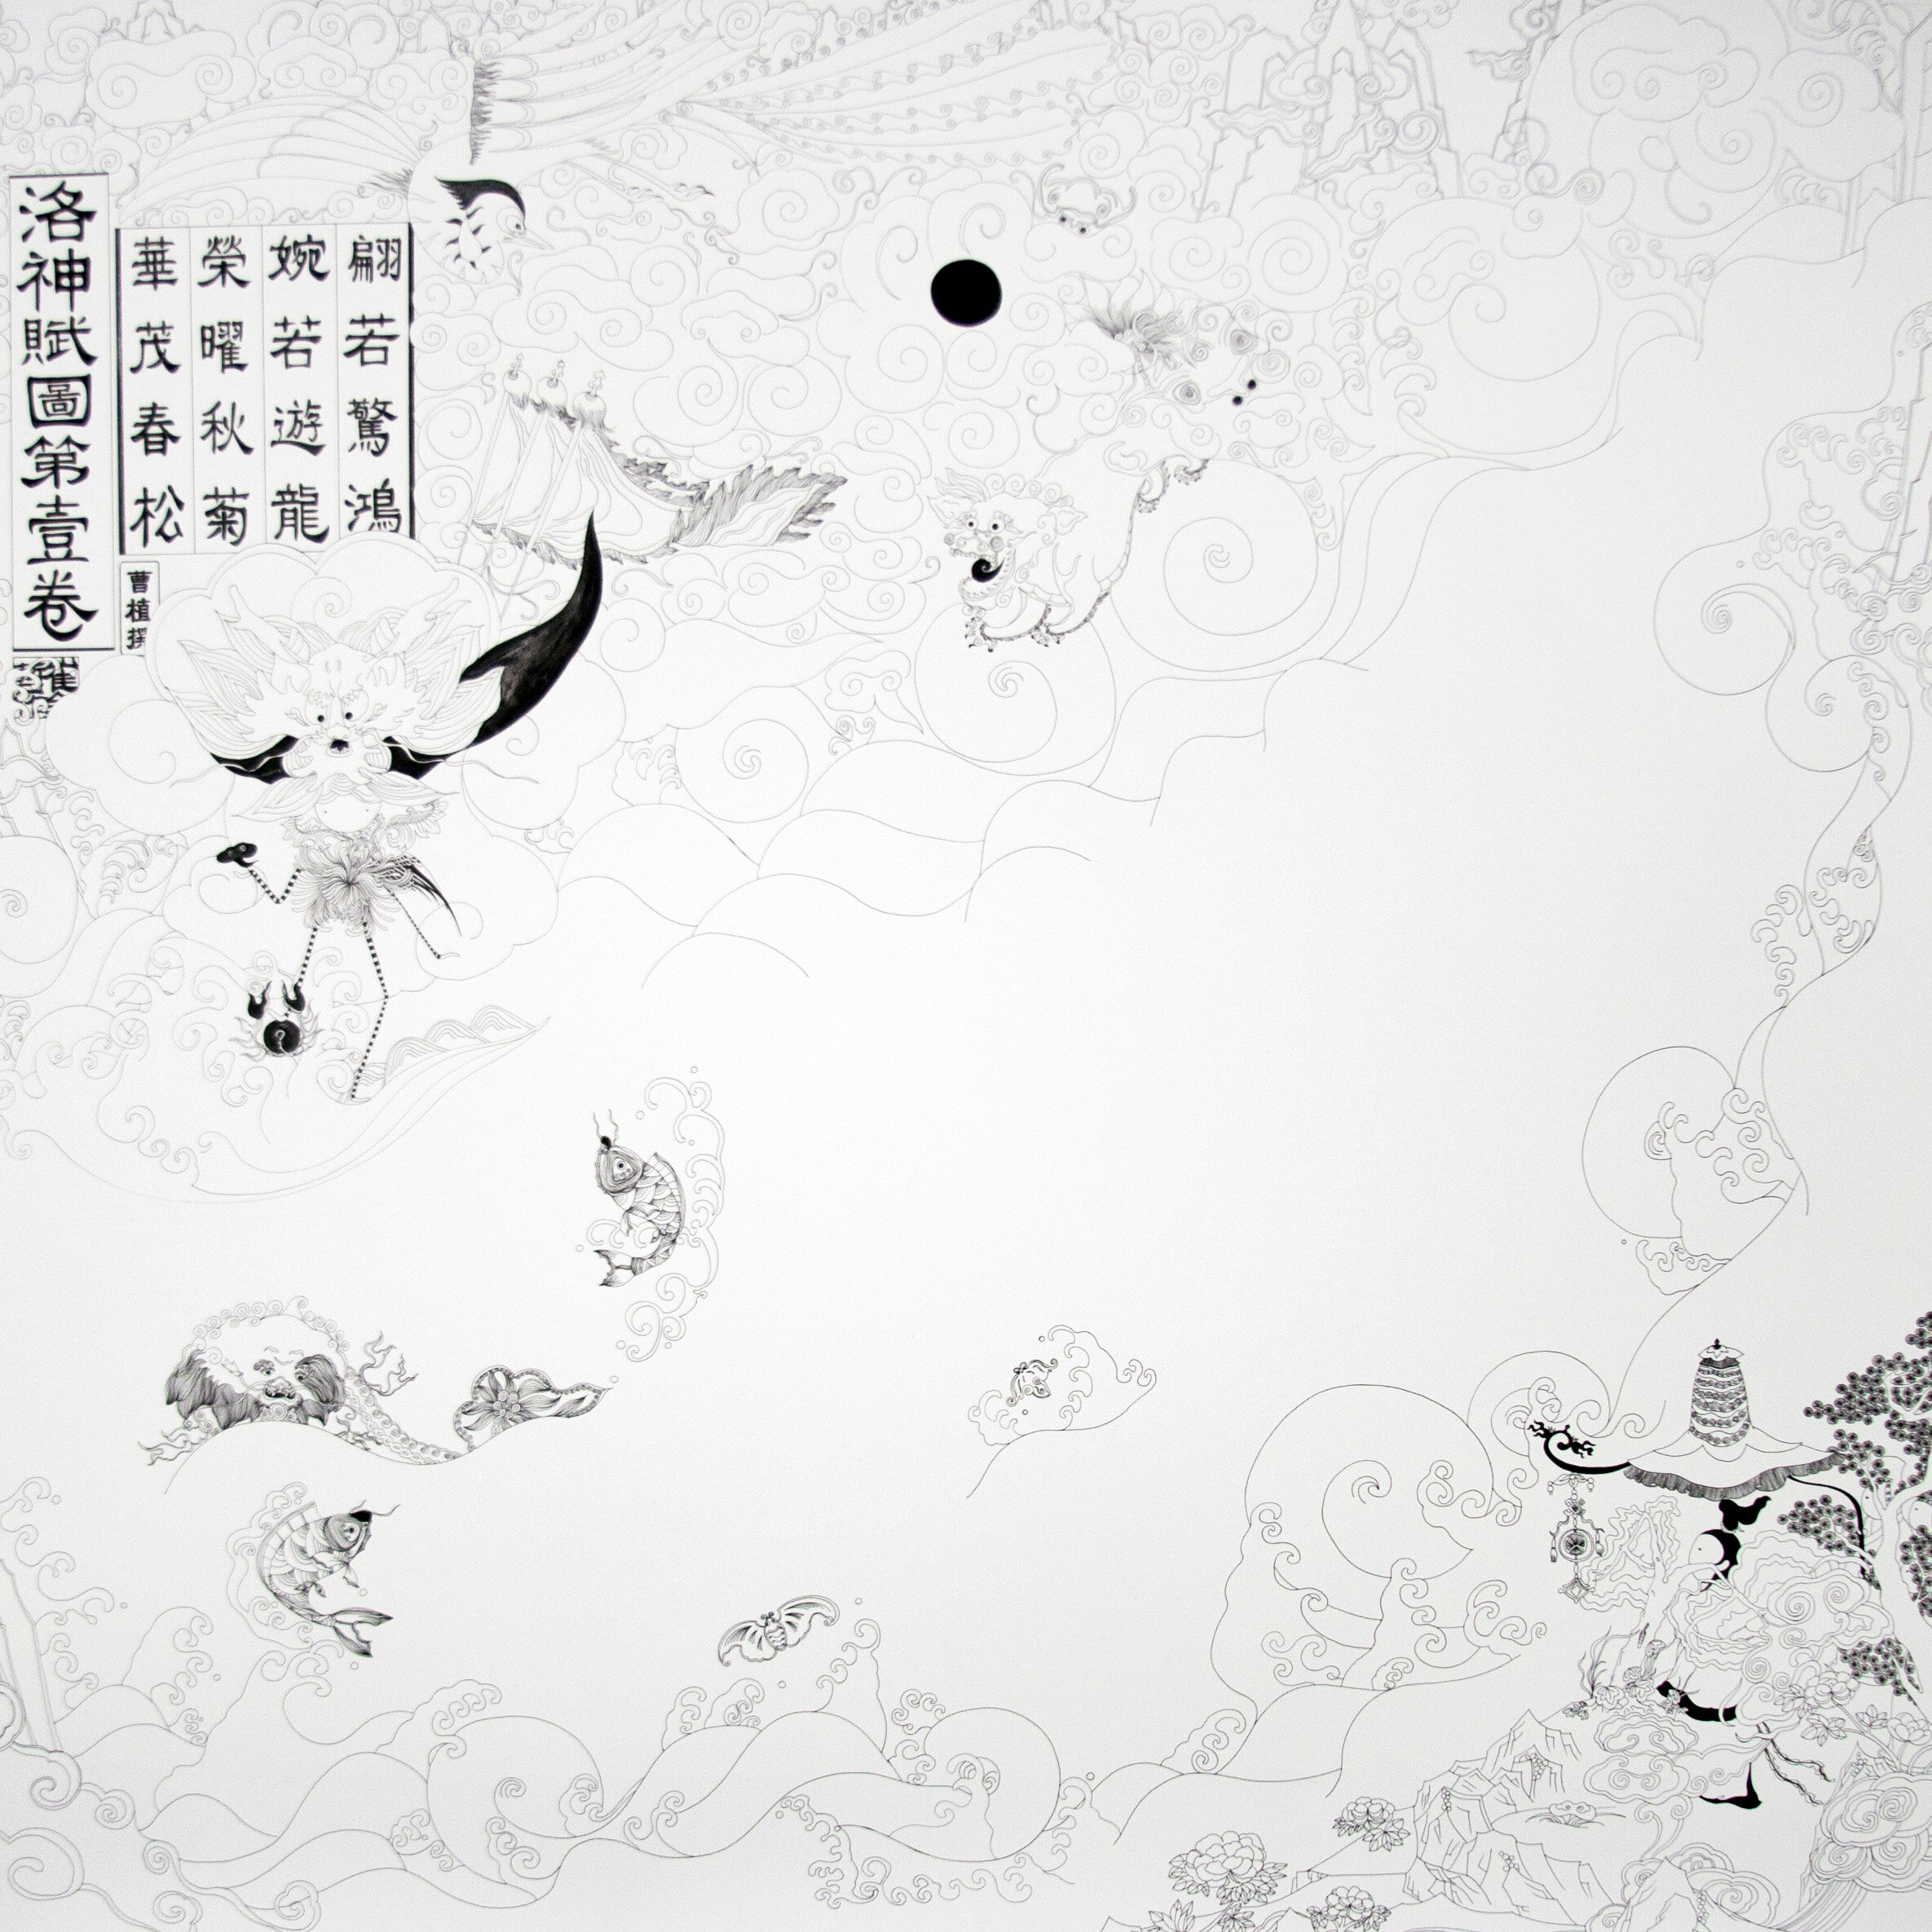  Cui Jinzhe, 卷一“初见” First Encounter , 2020. ink on paper. Photo: courtesy of the artist. 